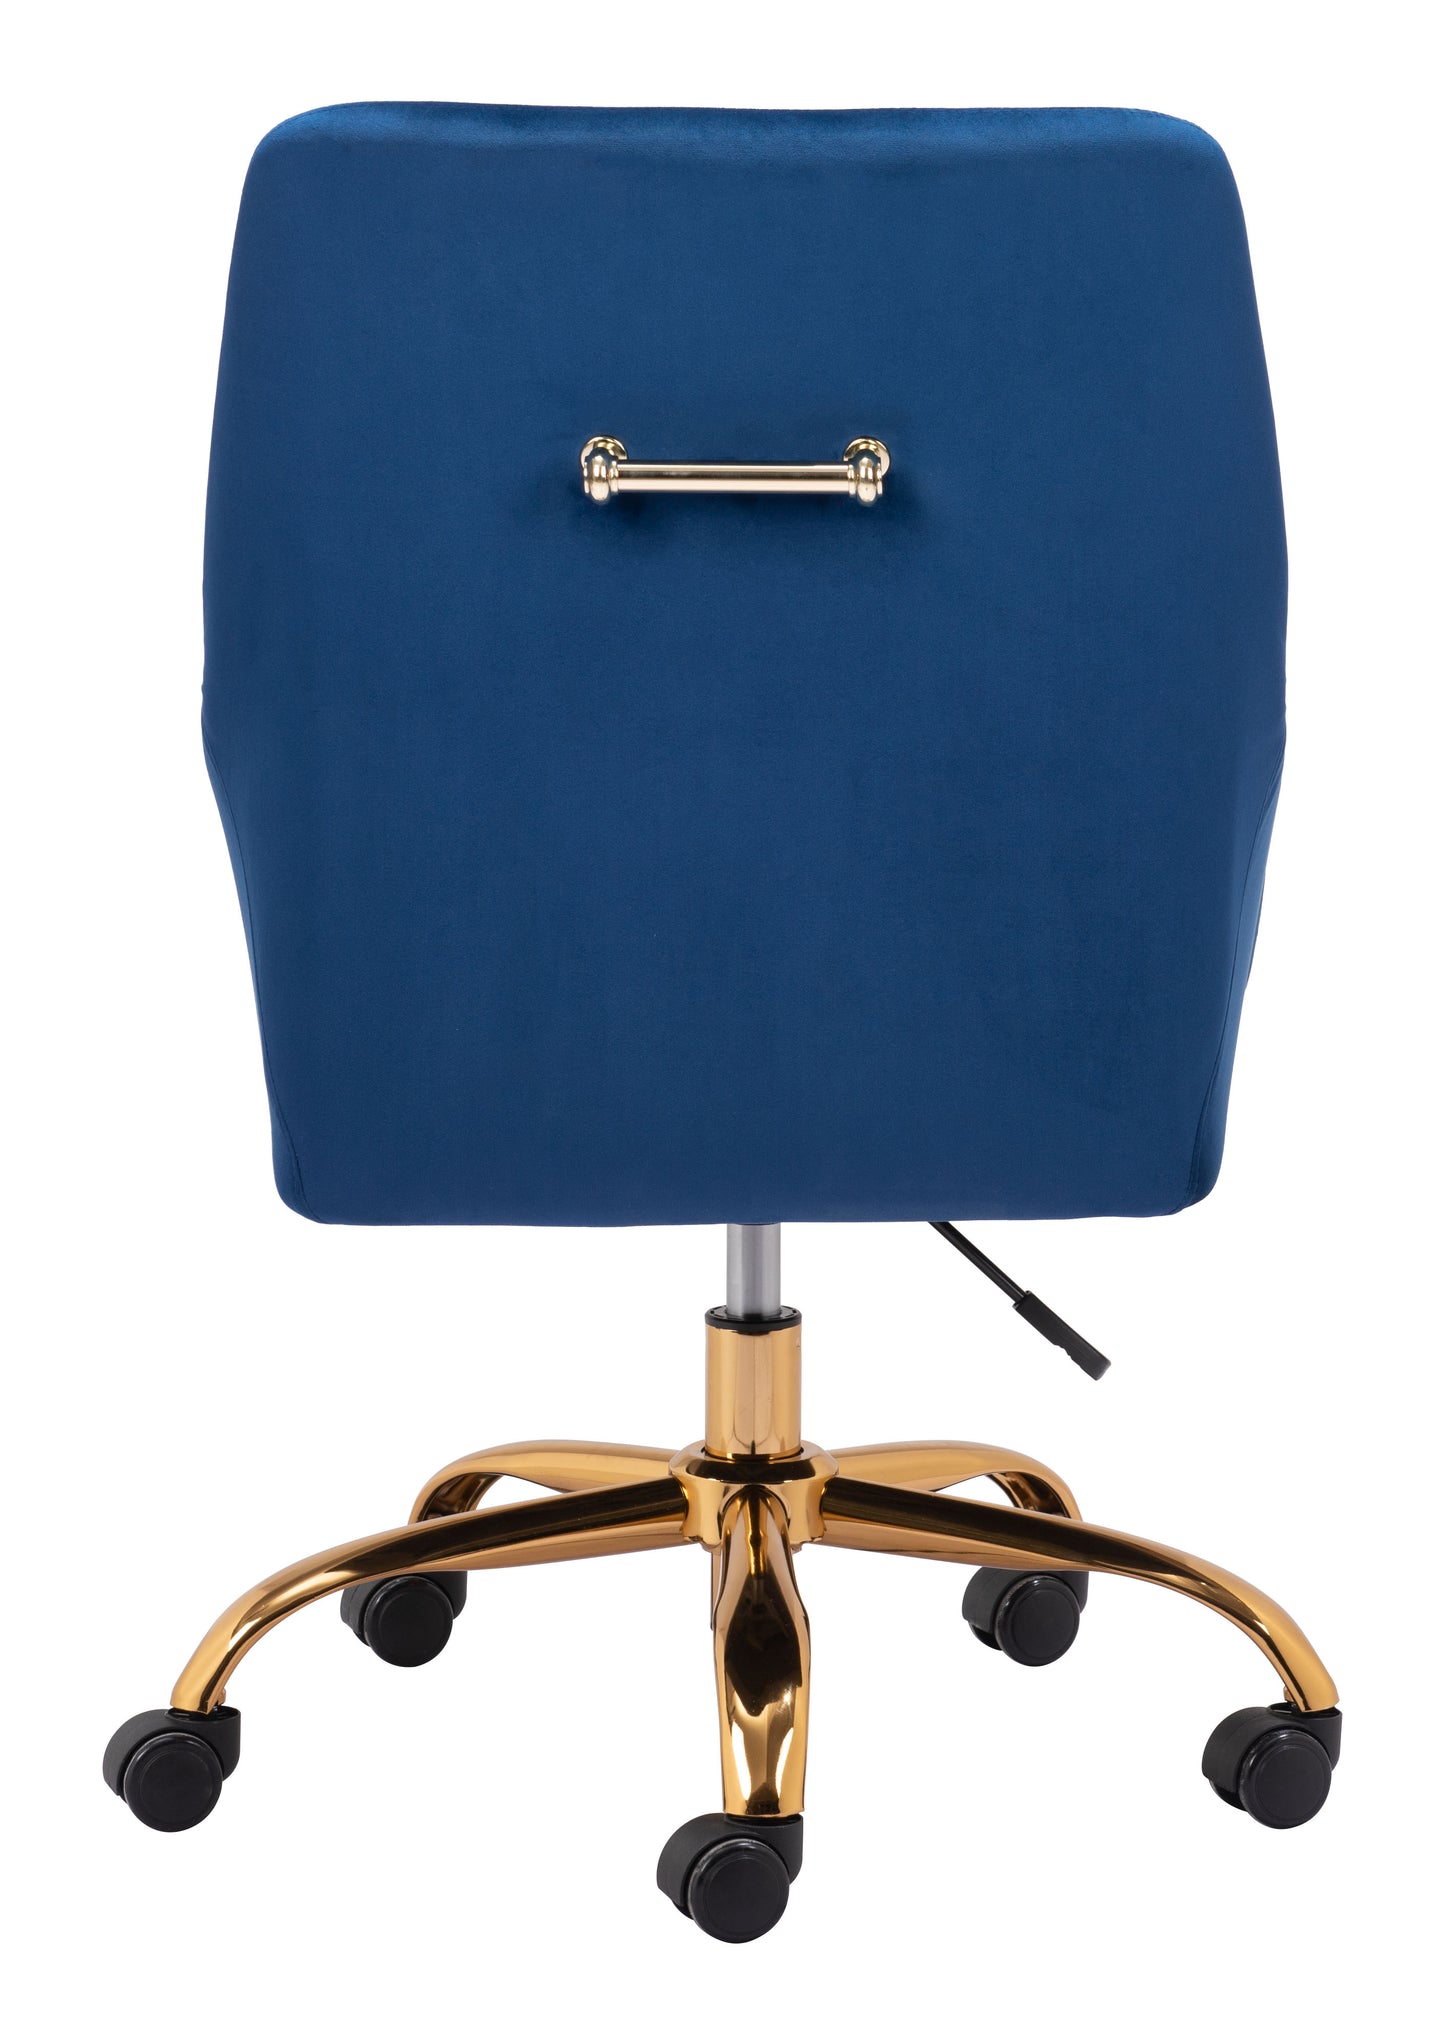 Madelaine Office Chair Navy Blue & Gold